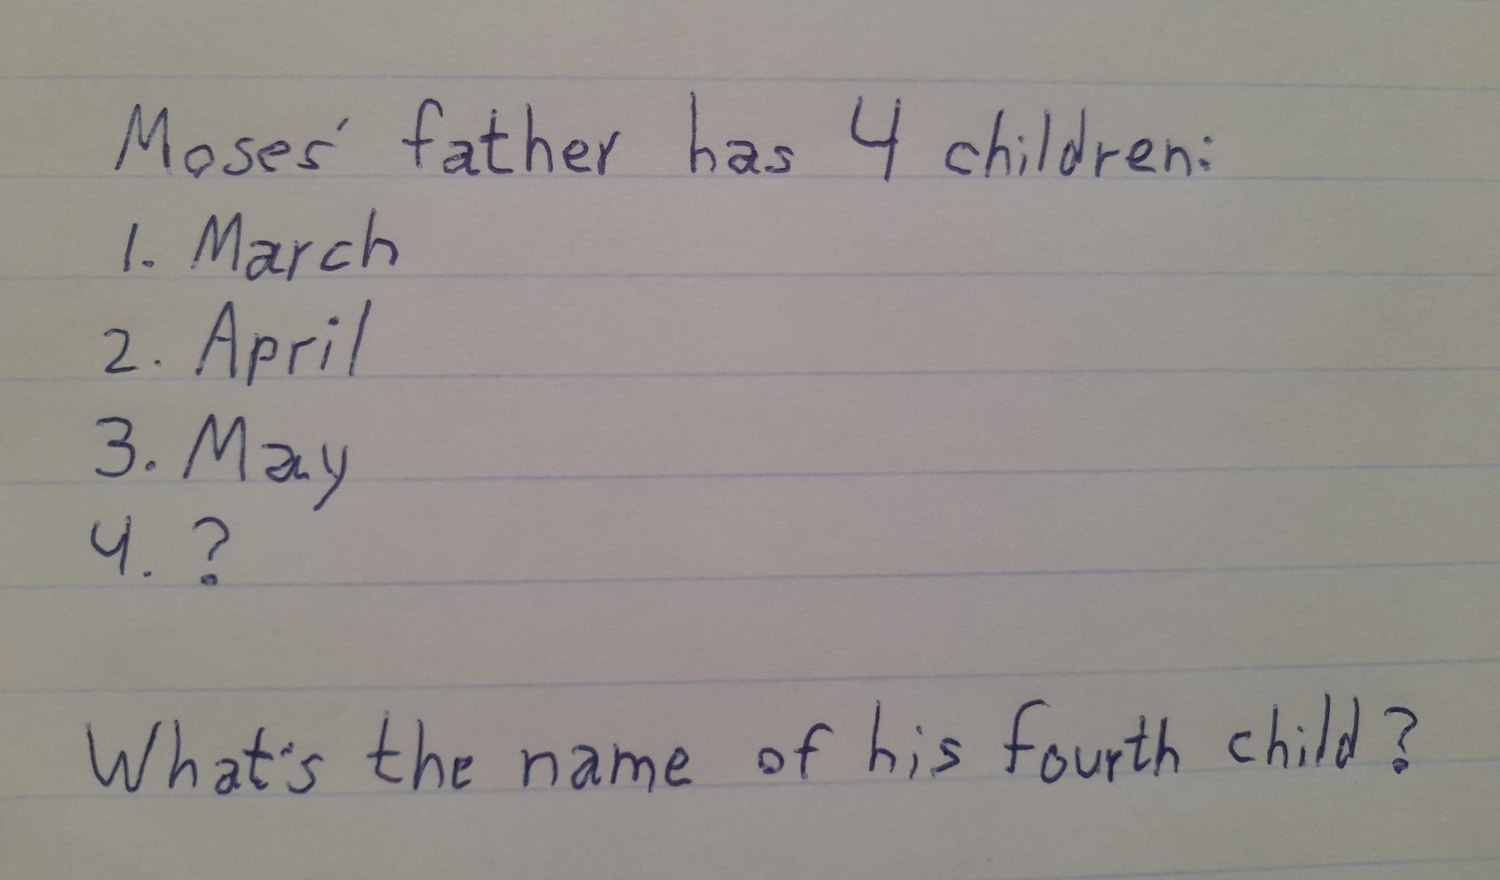 Only 1 in 5 people manage to solve this riddle quickly: can you find out the name of the father's fourth son?